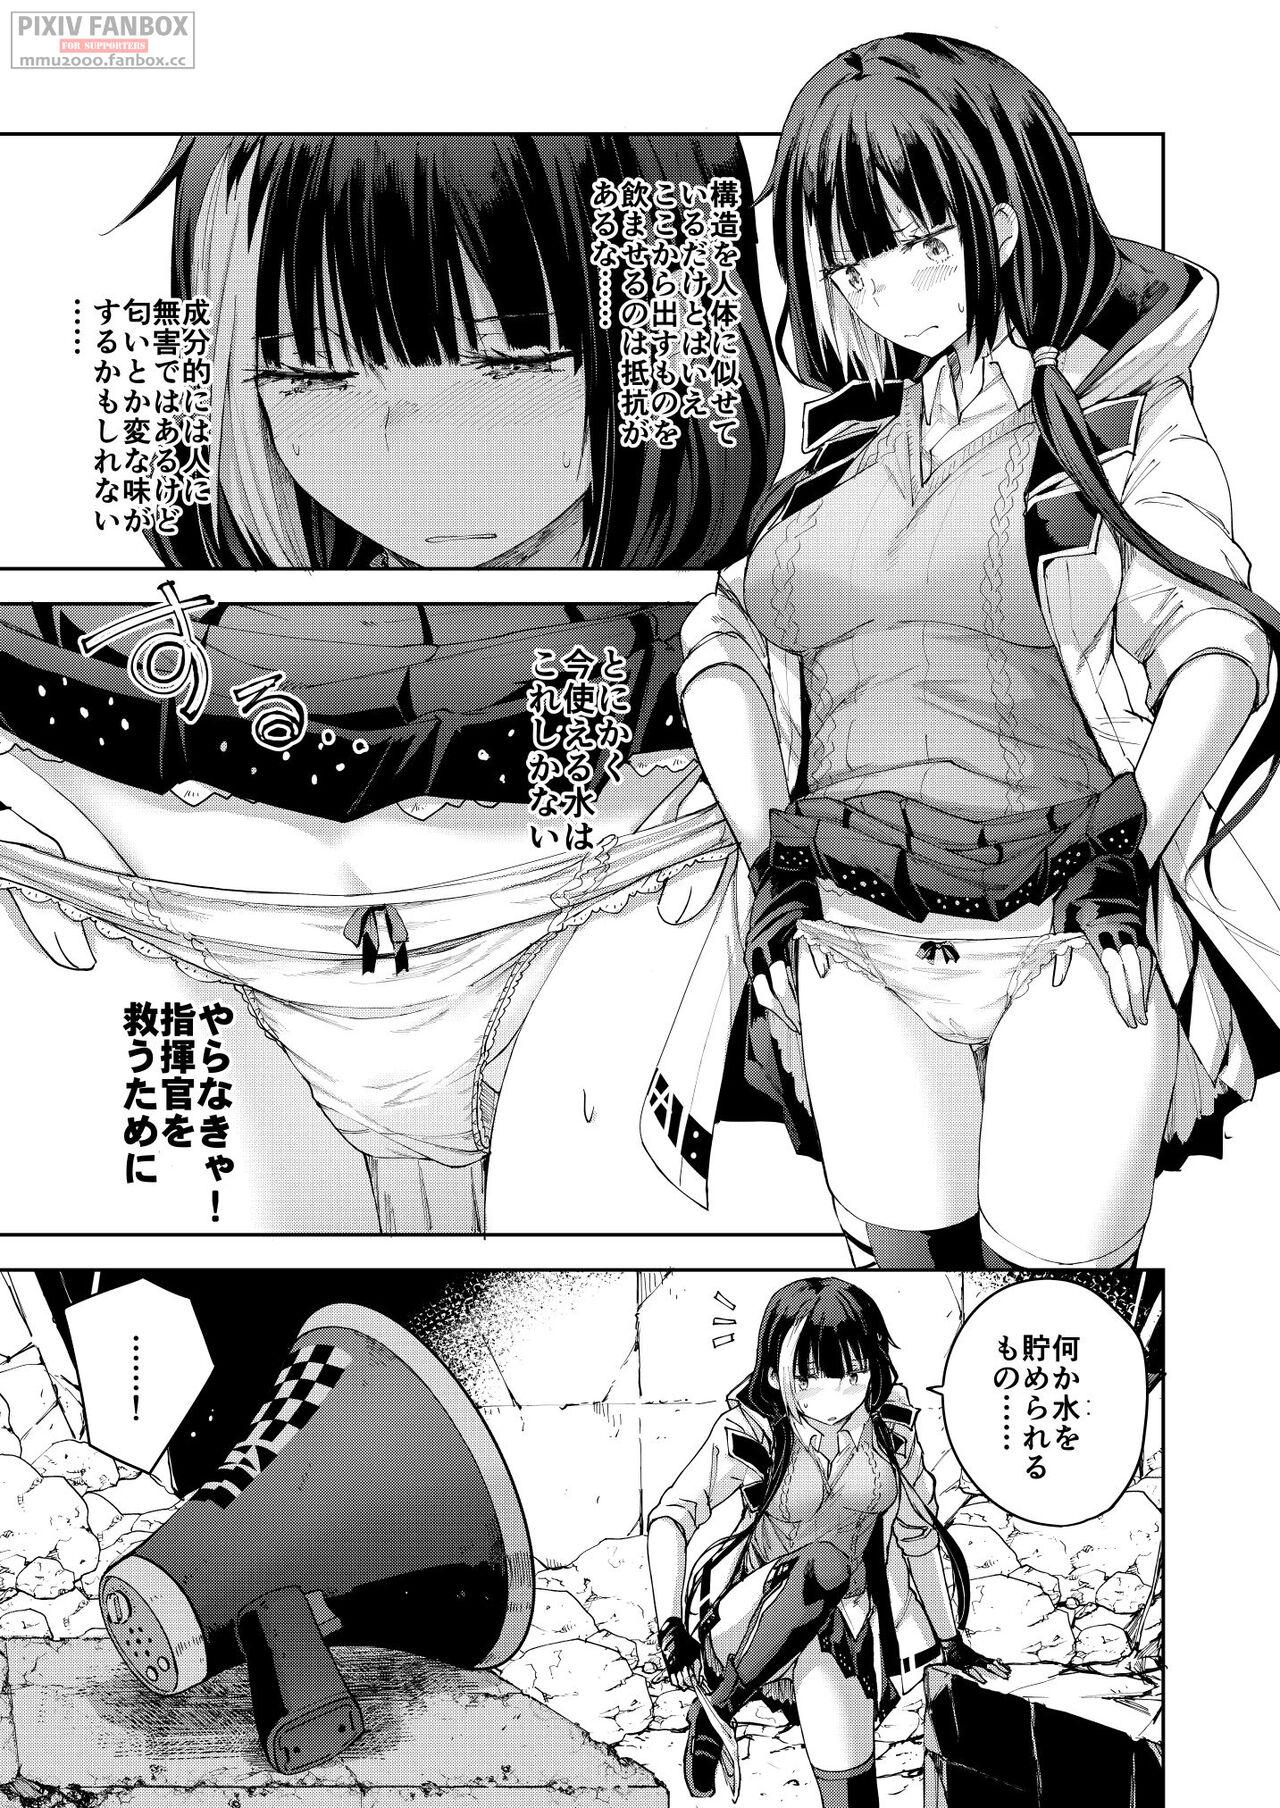 Polish RO-TION - Girls frontline Pregnant - Page 12